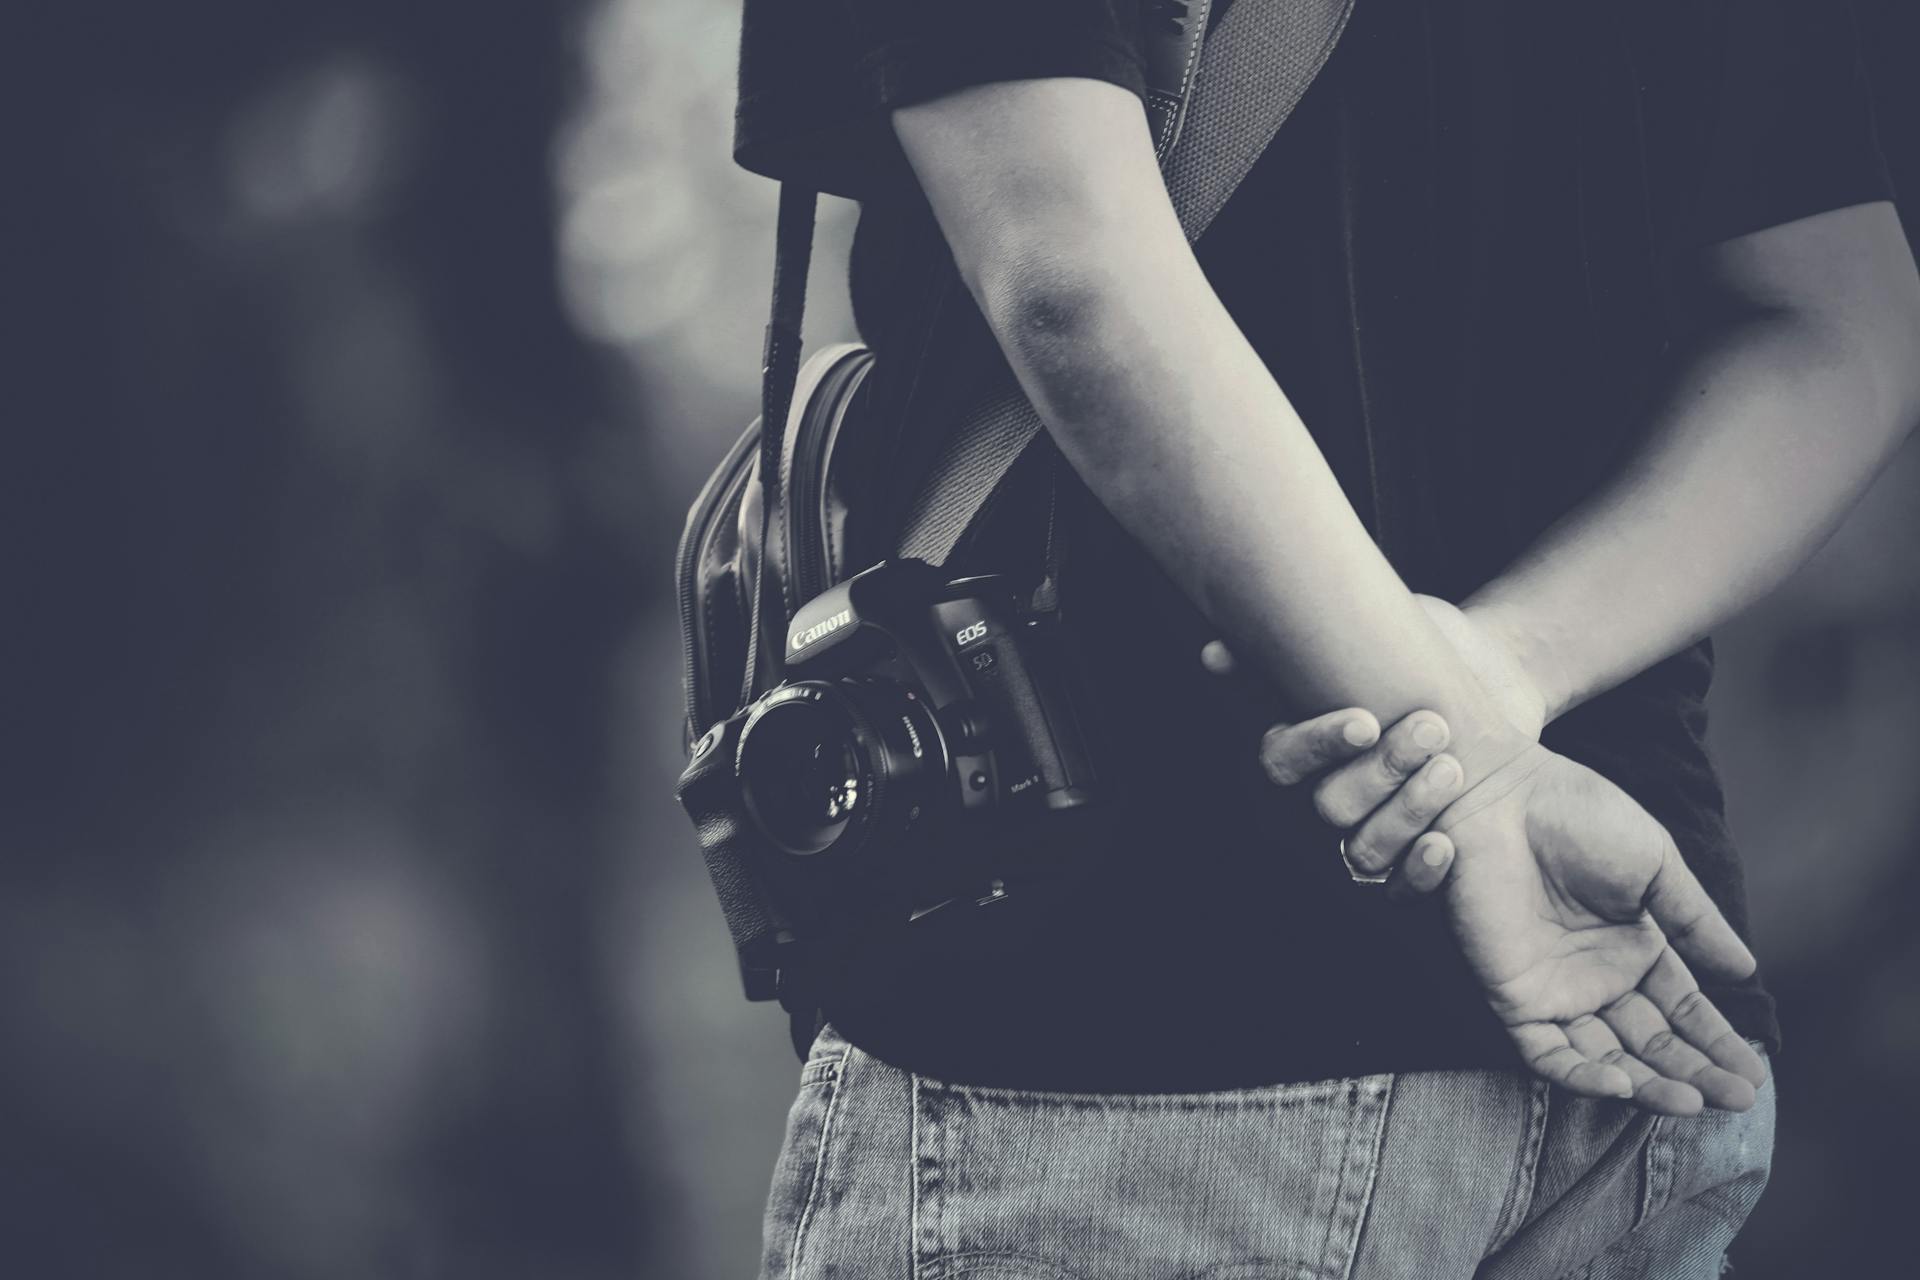 A man with a bag and a camera | Source: Pexels